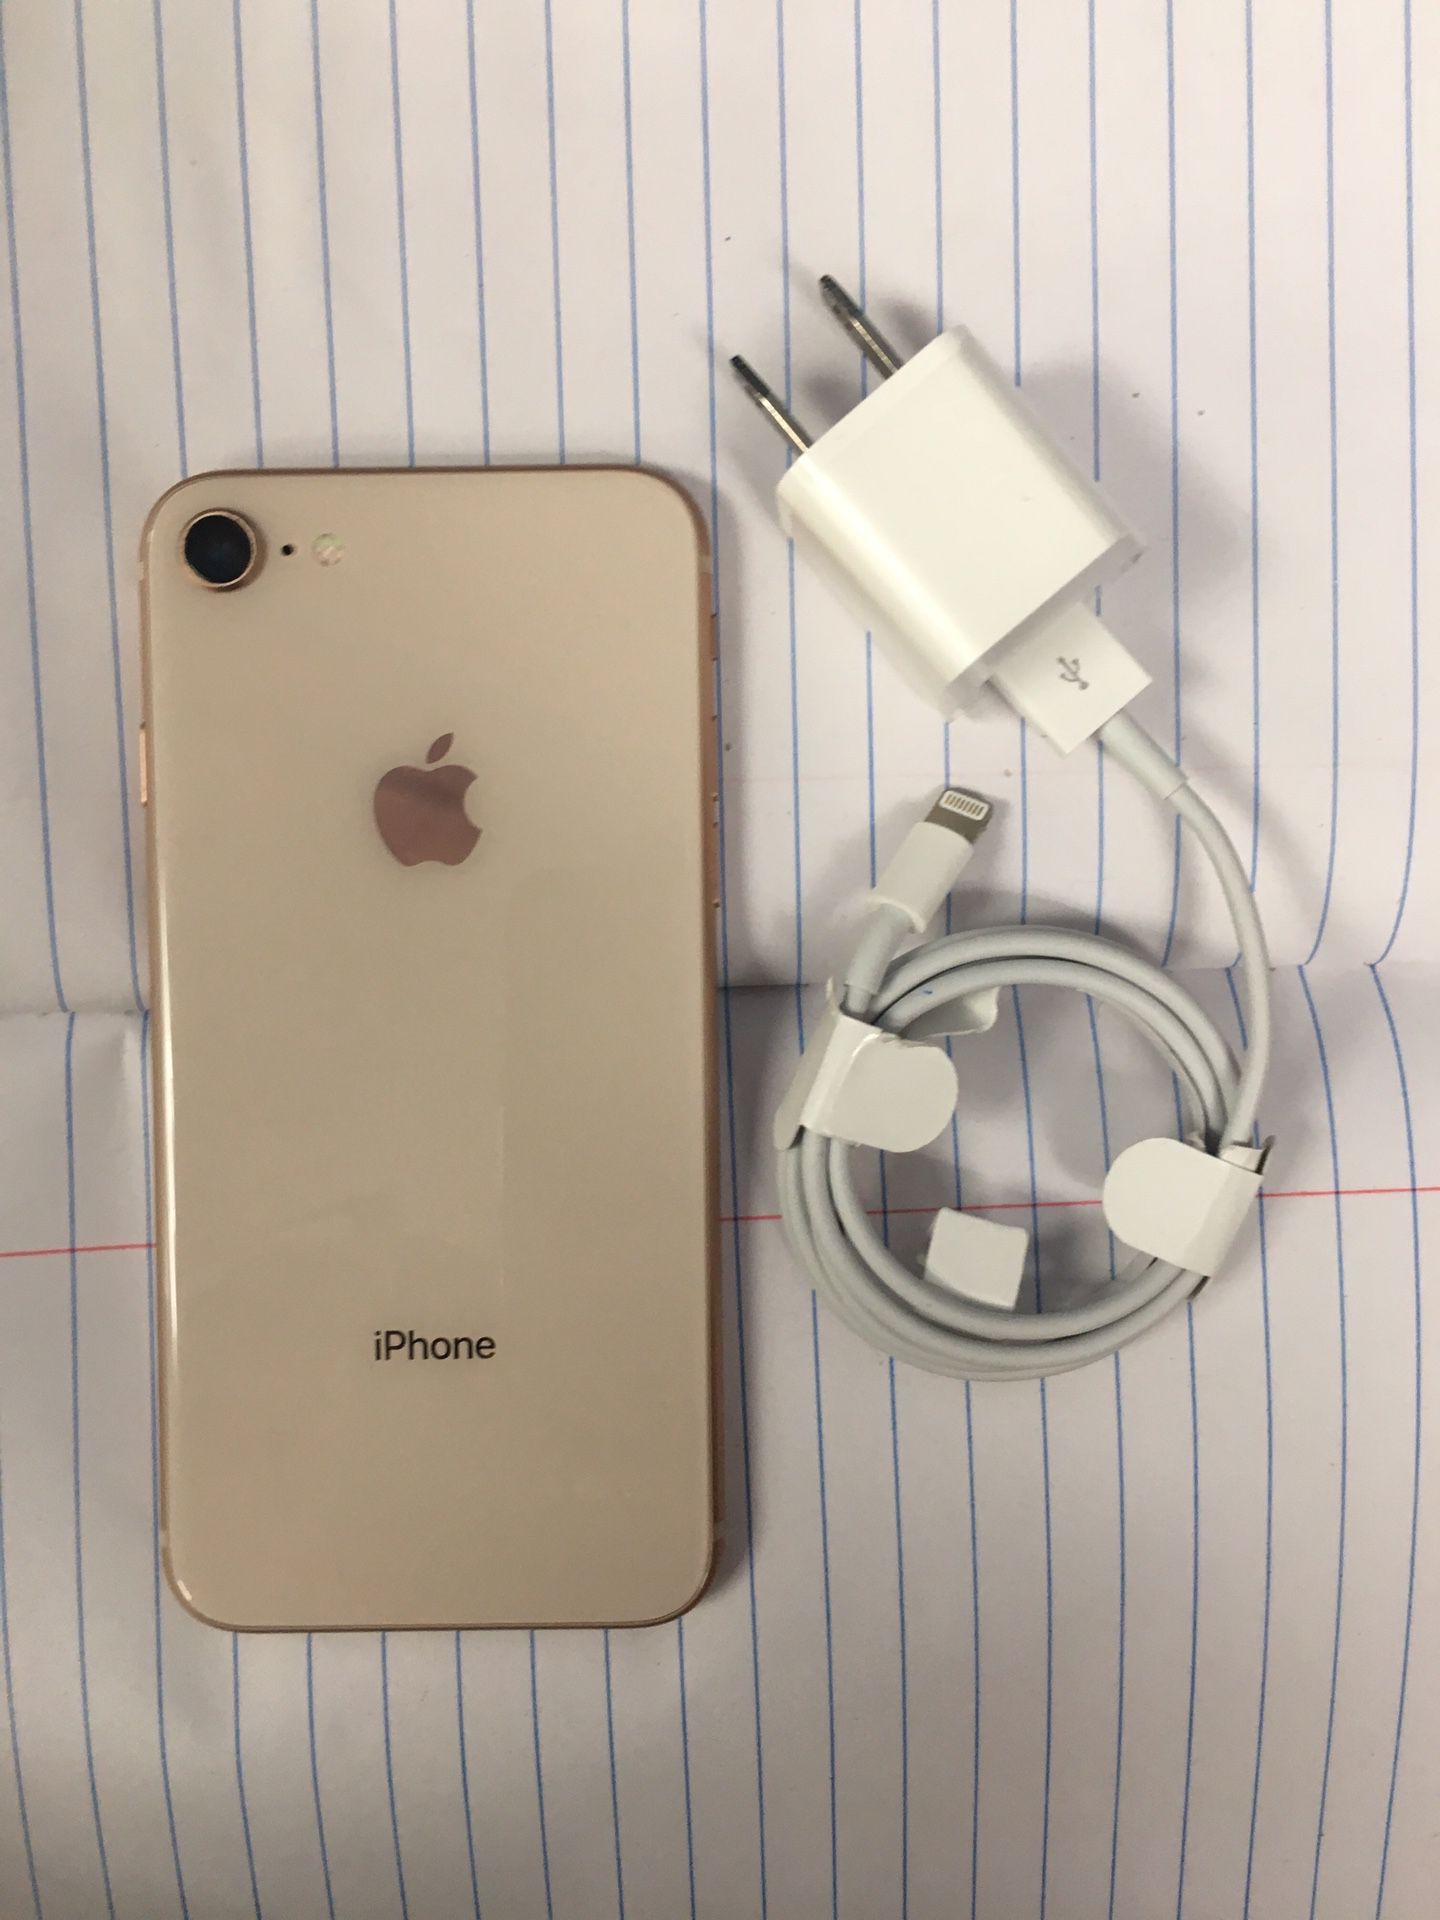 Iphone 8 64GB.Excellent Condition. Unlocked for any carrier sim in USA or WORLDWIDE